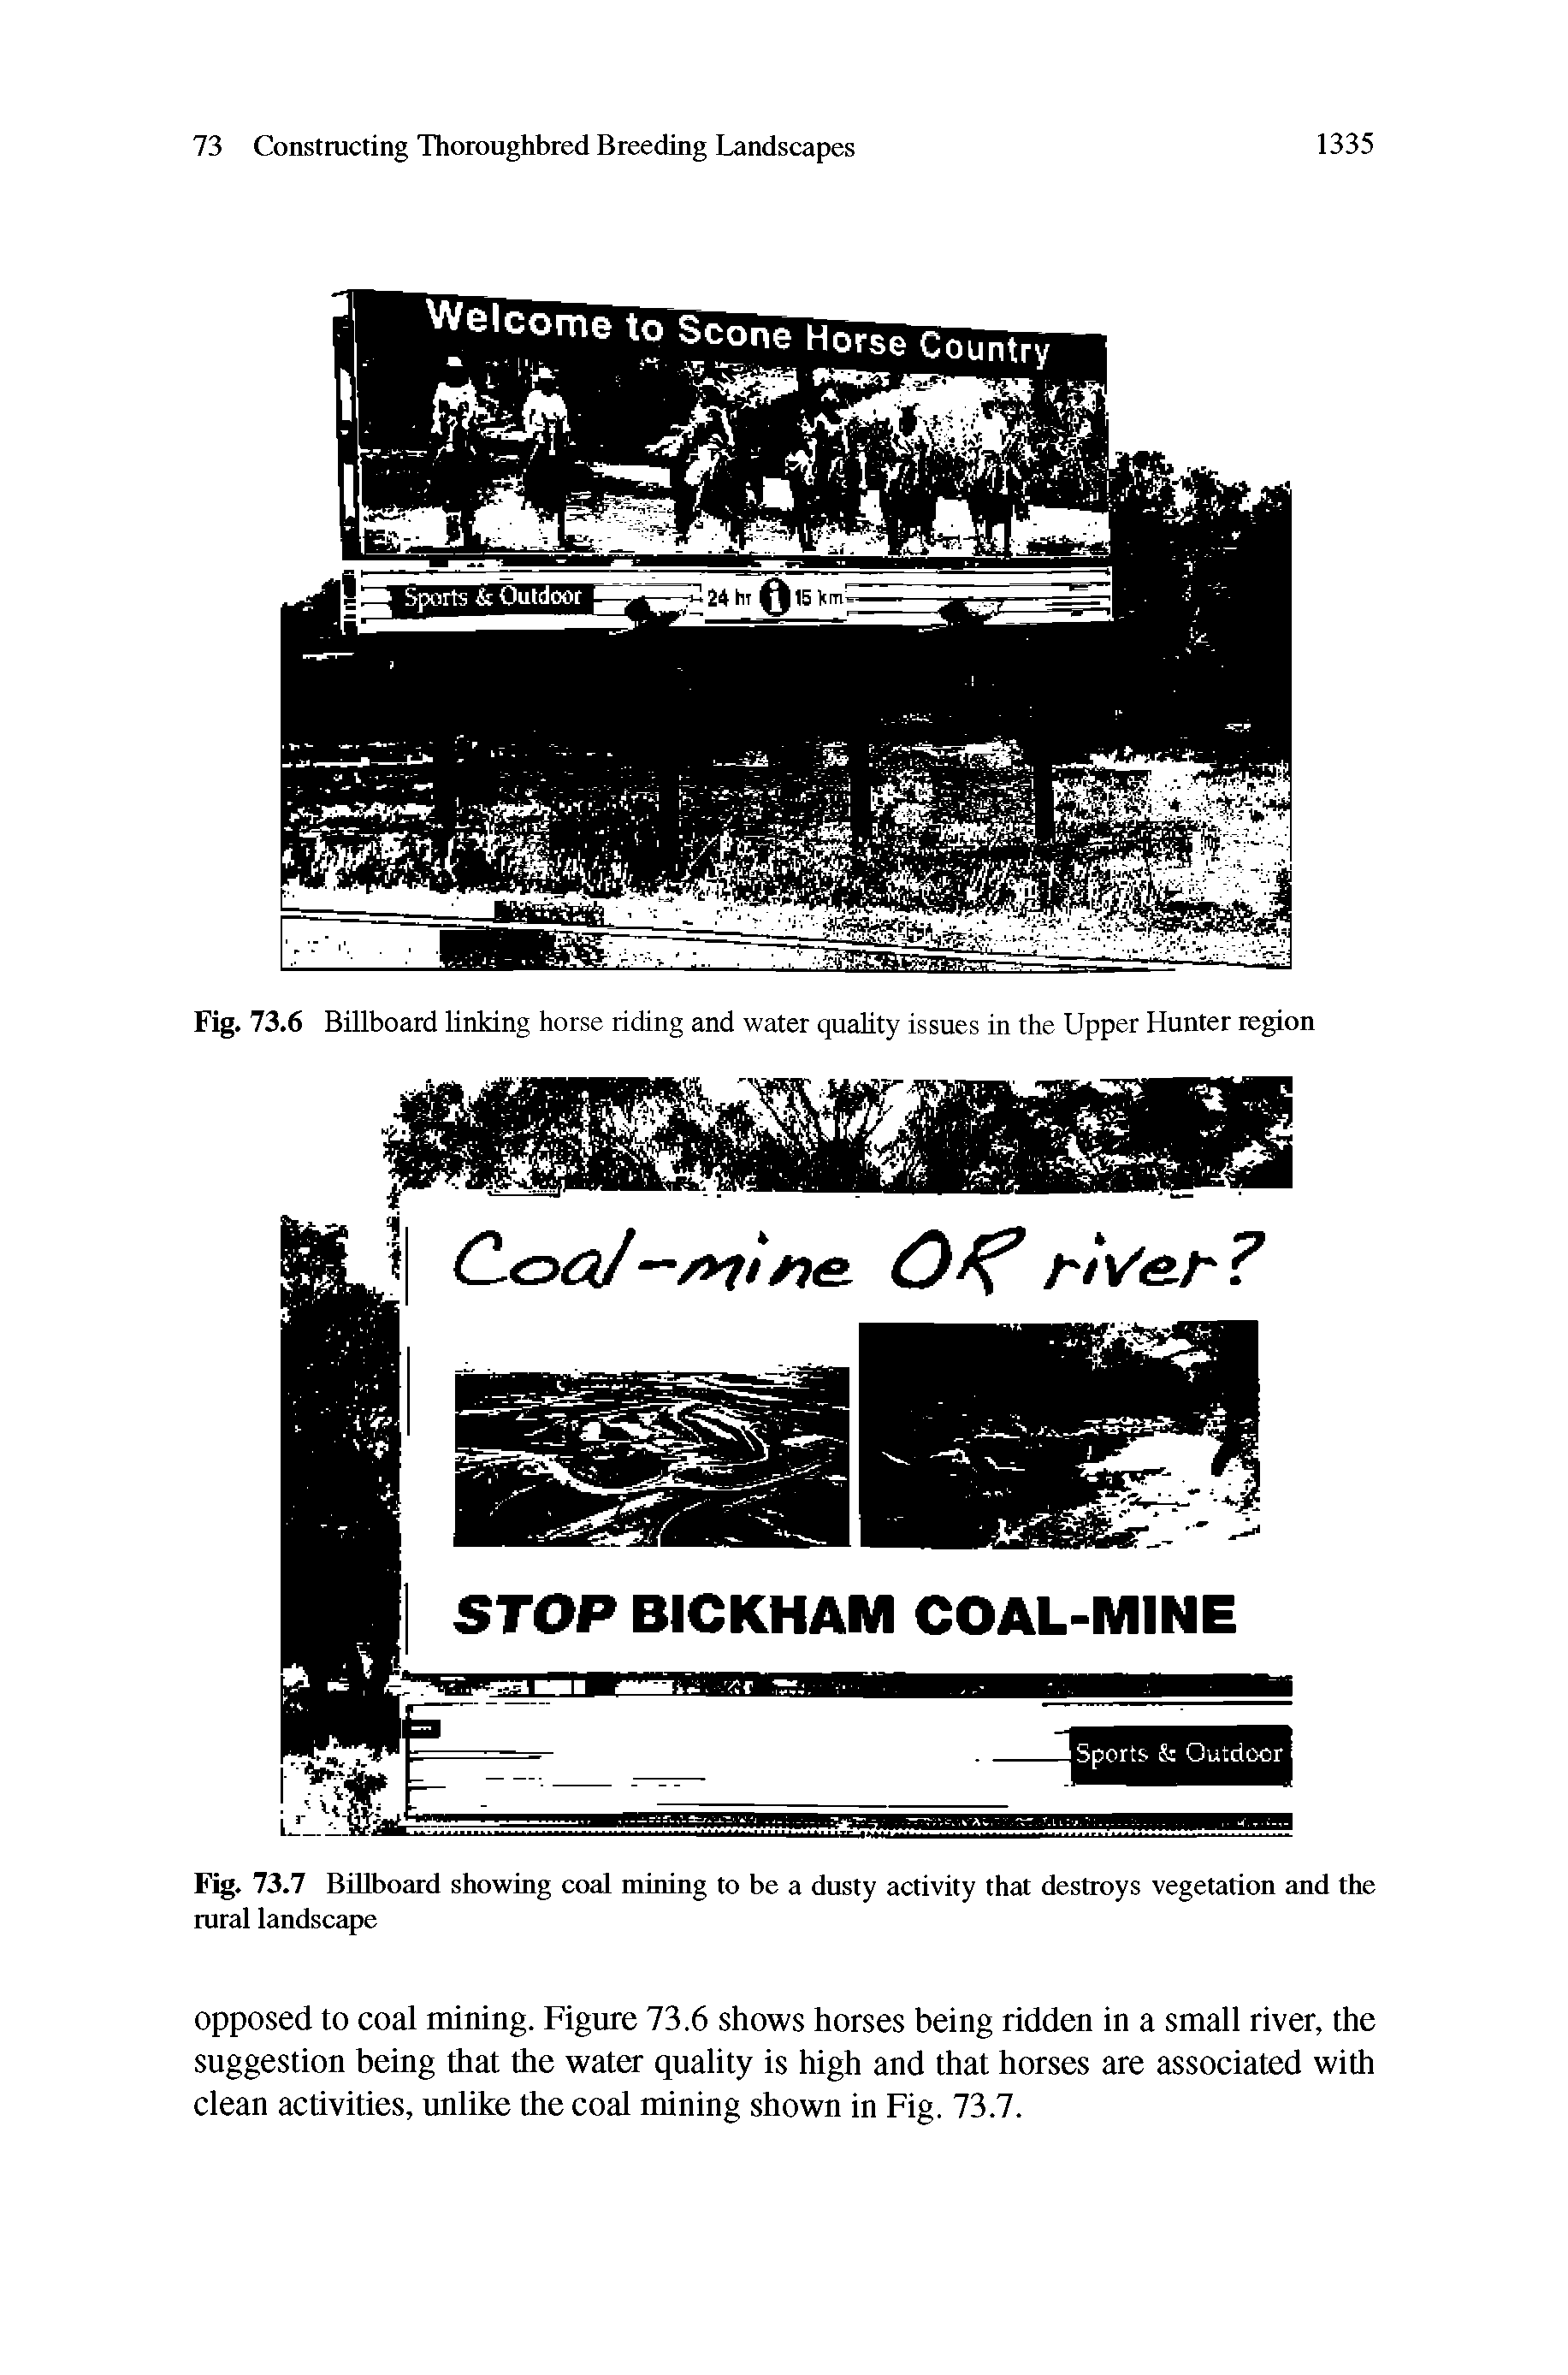 Fig. 73.7 Billboard showing coal mining to be a dusty activity that destroys vegetation and the rural landscape...